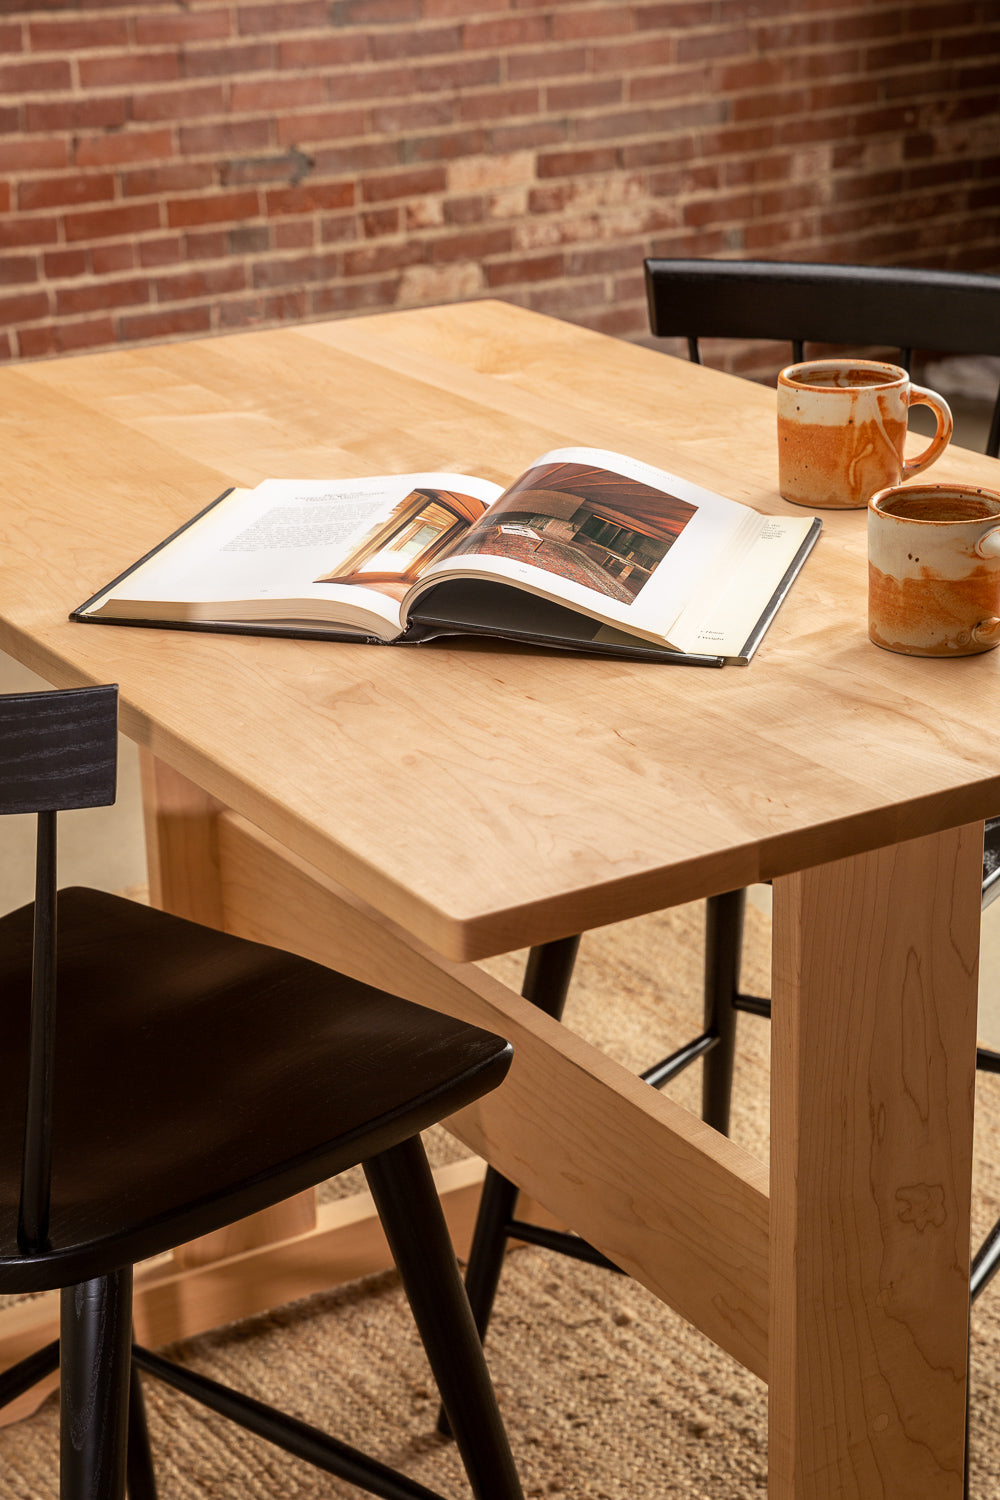 Coffee cups and an open book on the Acadia Breakfast Bar in maple with black counter stools